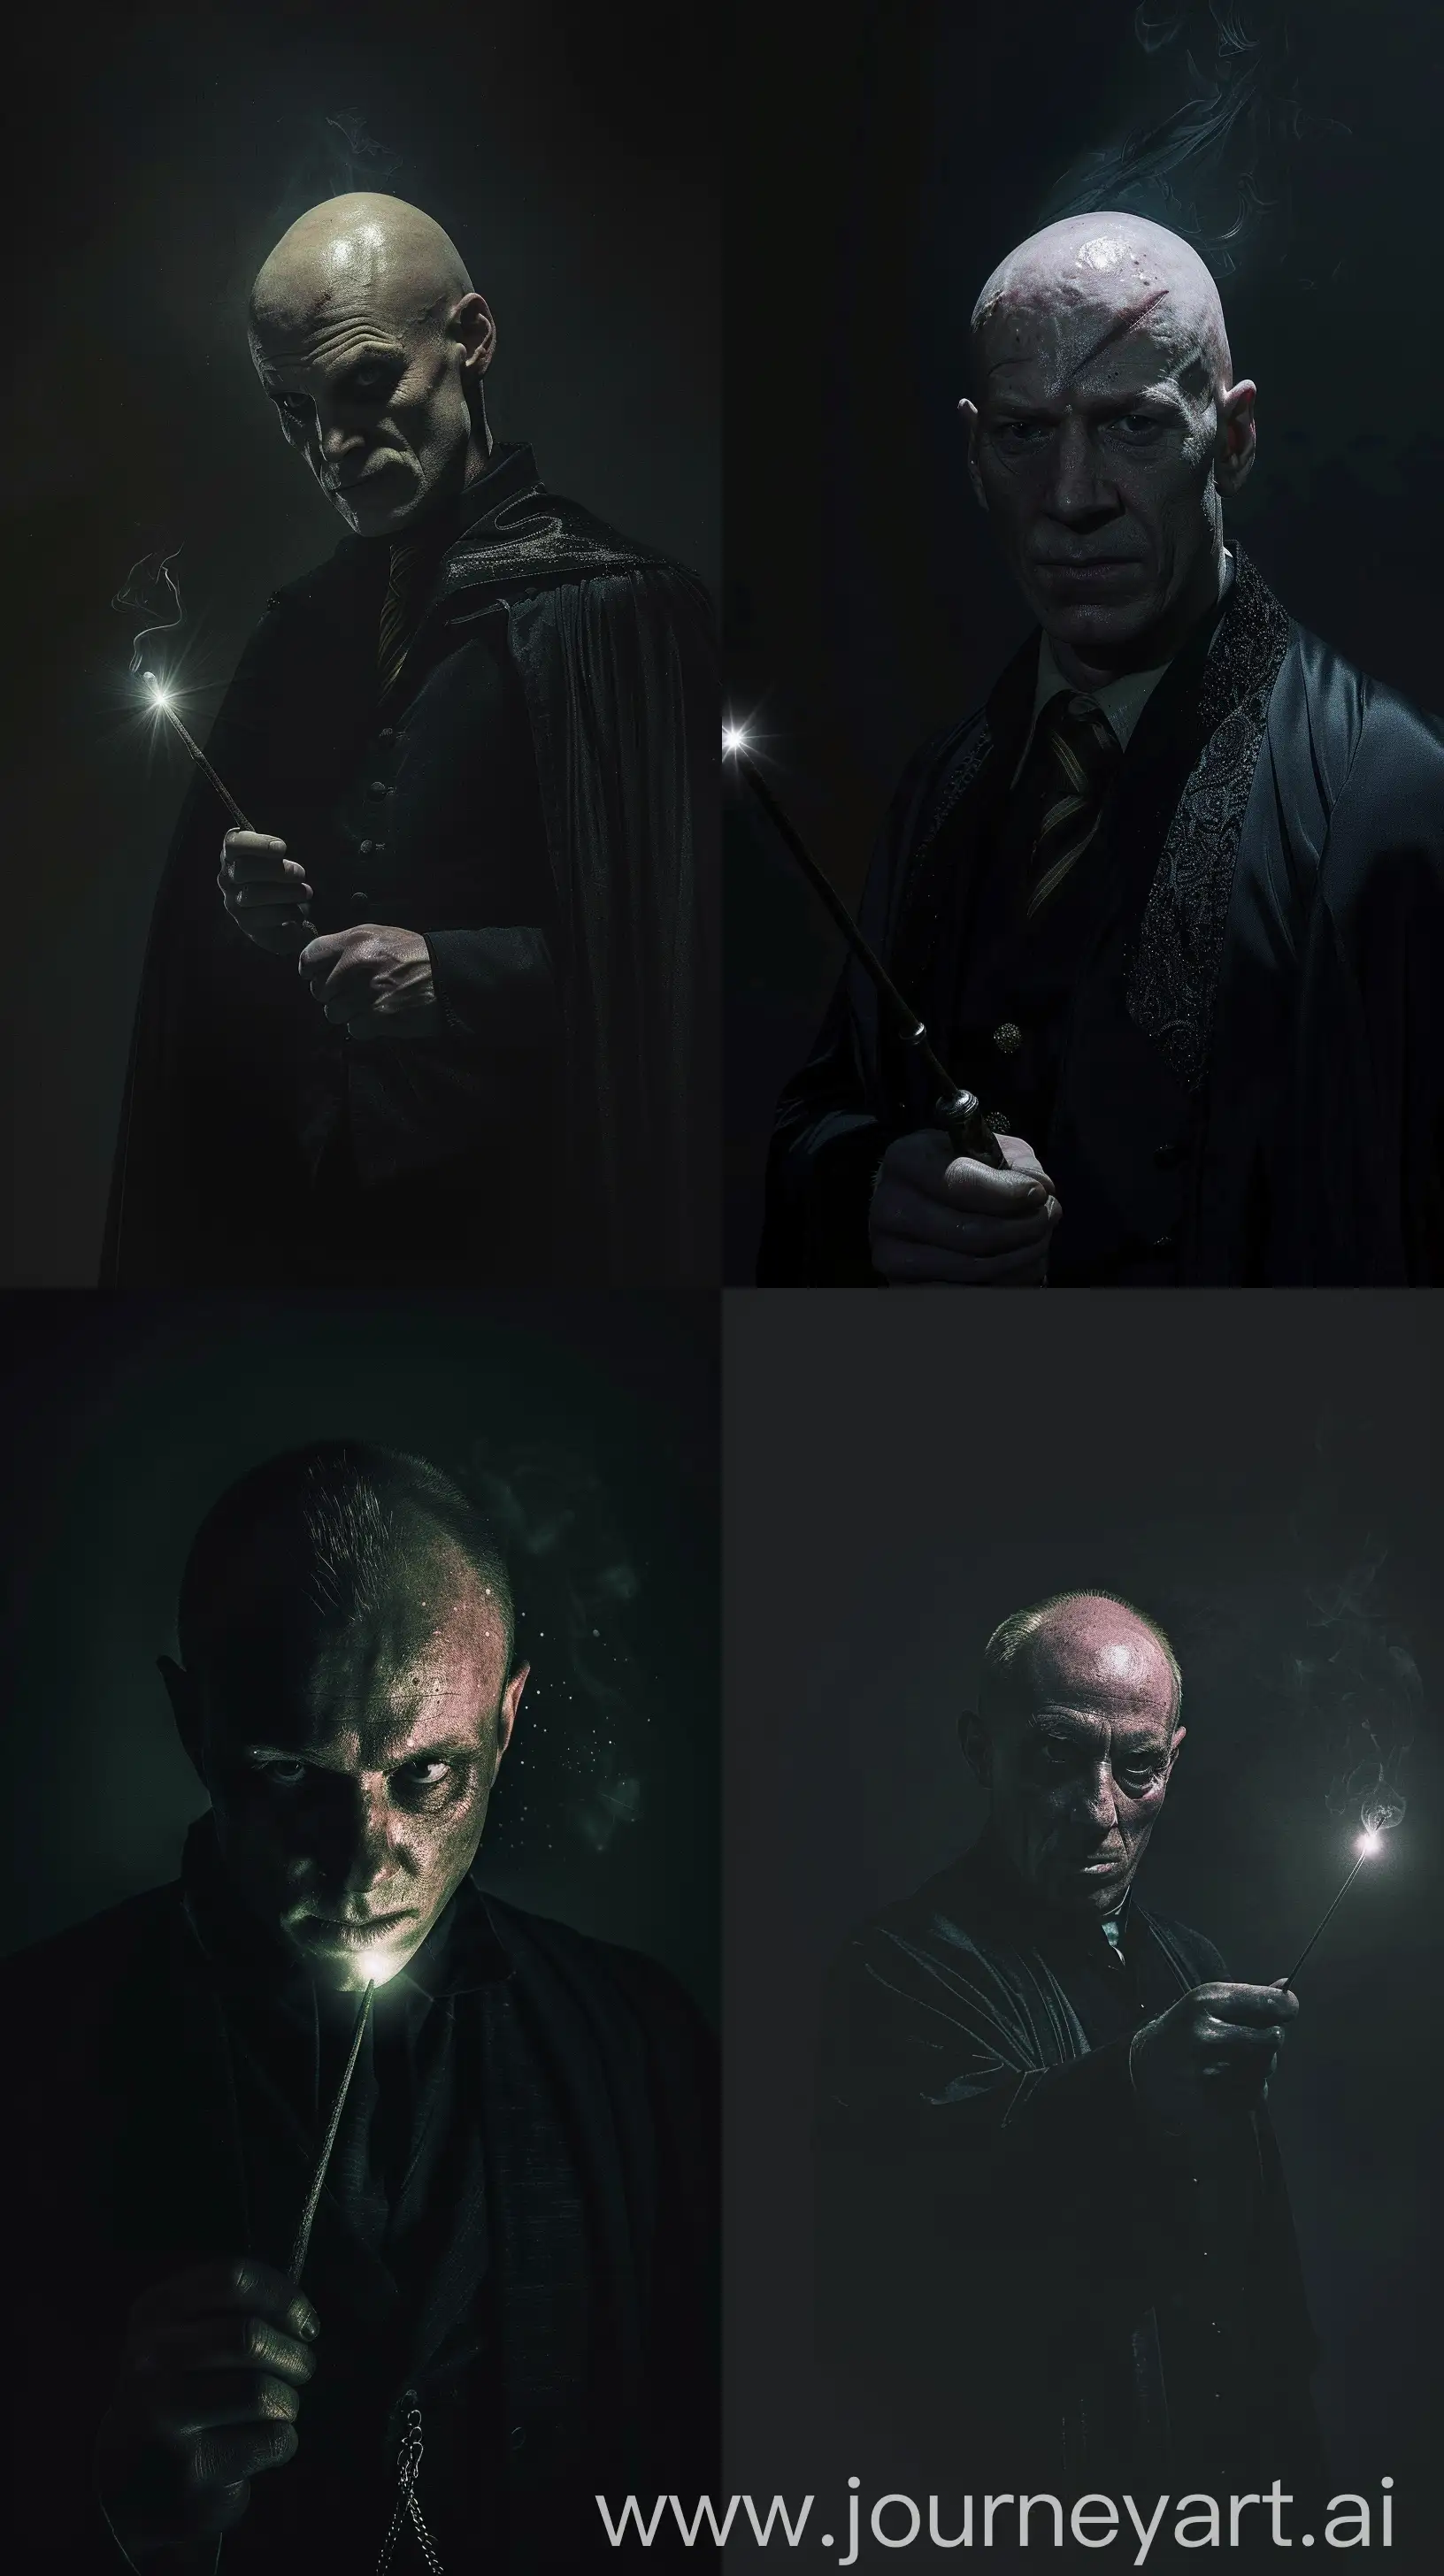 Draco-Malfoy-Casting-Spell-in-Darkness-with-Realistic-Portrait